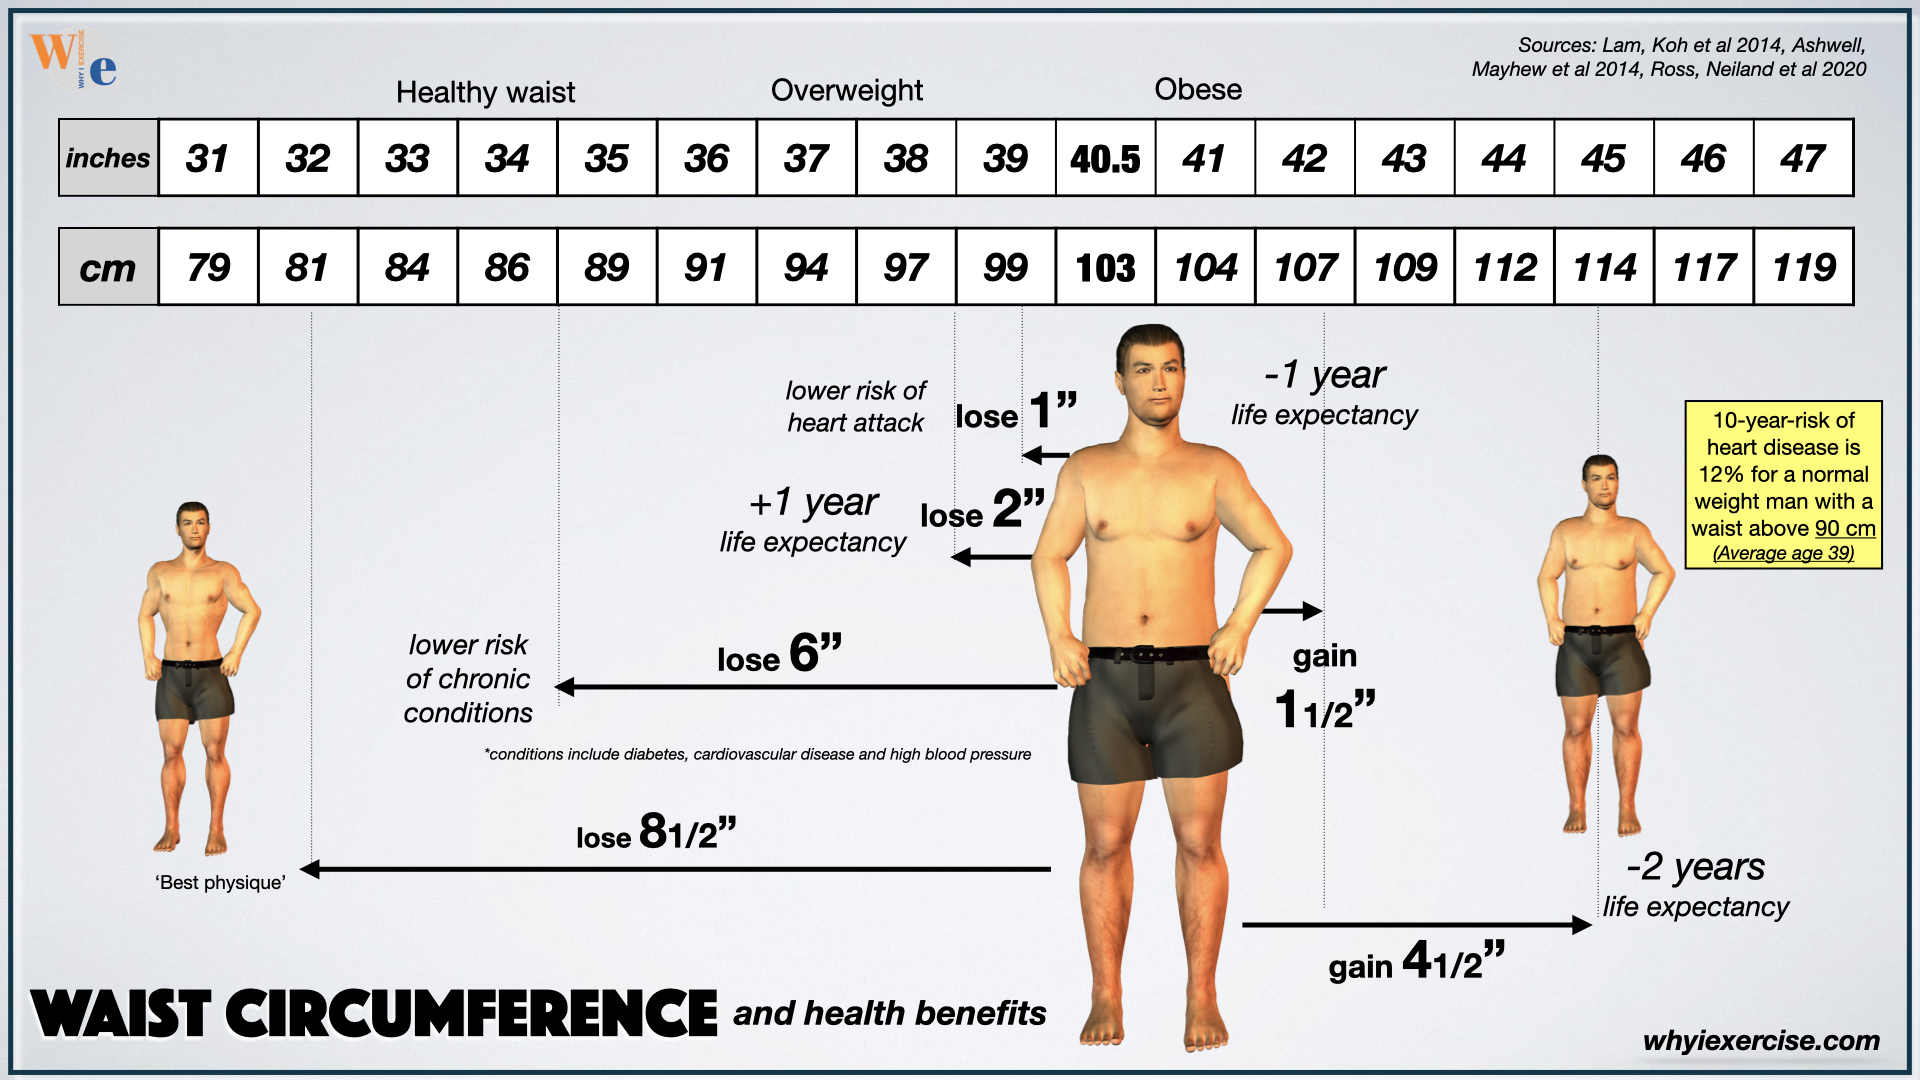 https://www.whyiexercise.com/images/waist.circumference.health.benefits.men.jpg